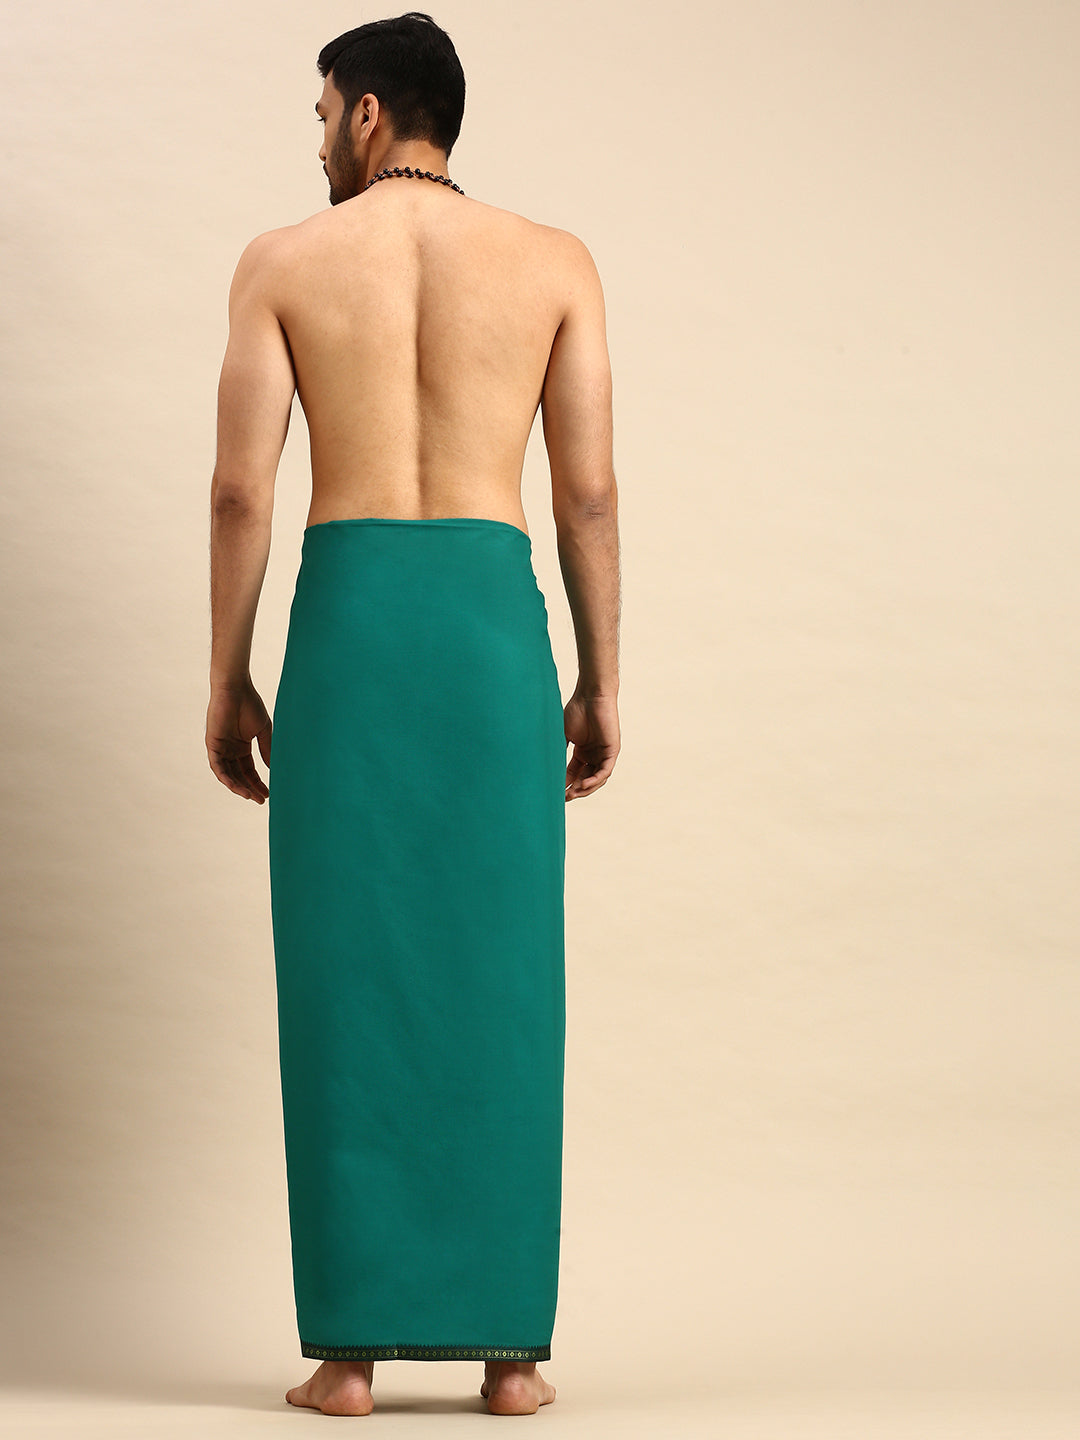 Mens Color Dhoti With Big Border Mercury Green-Back view